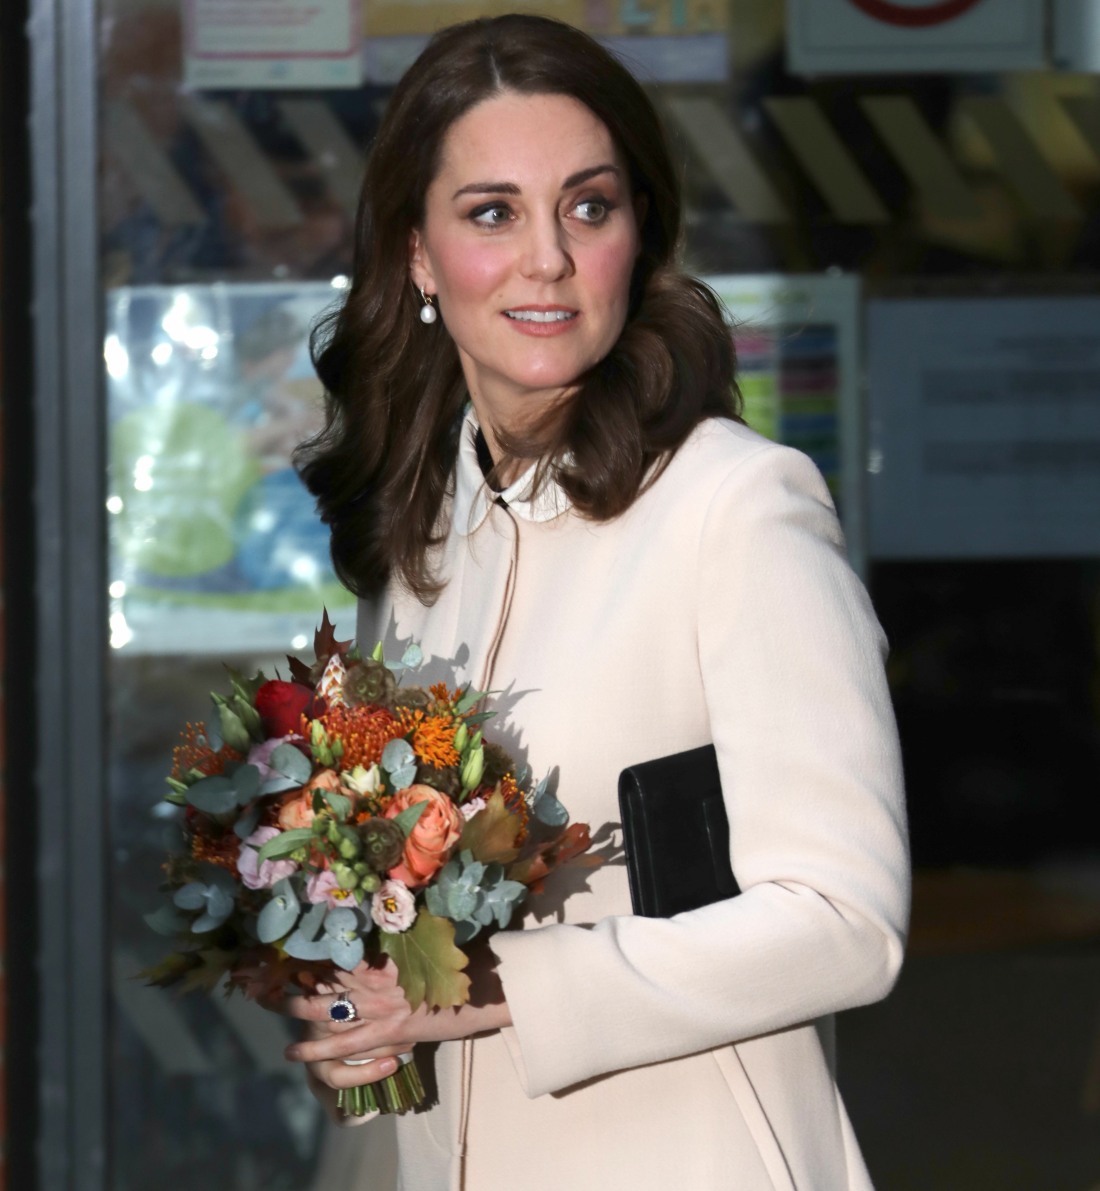 The Duchess of Cambridge visits the Hornsey Road Children's Centre